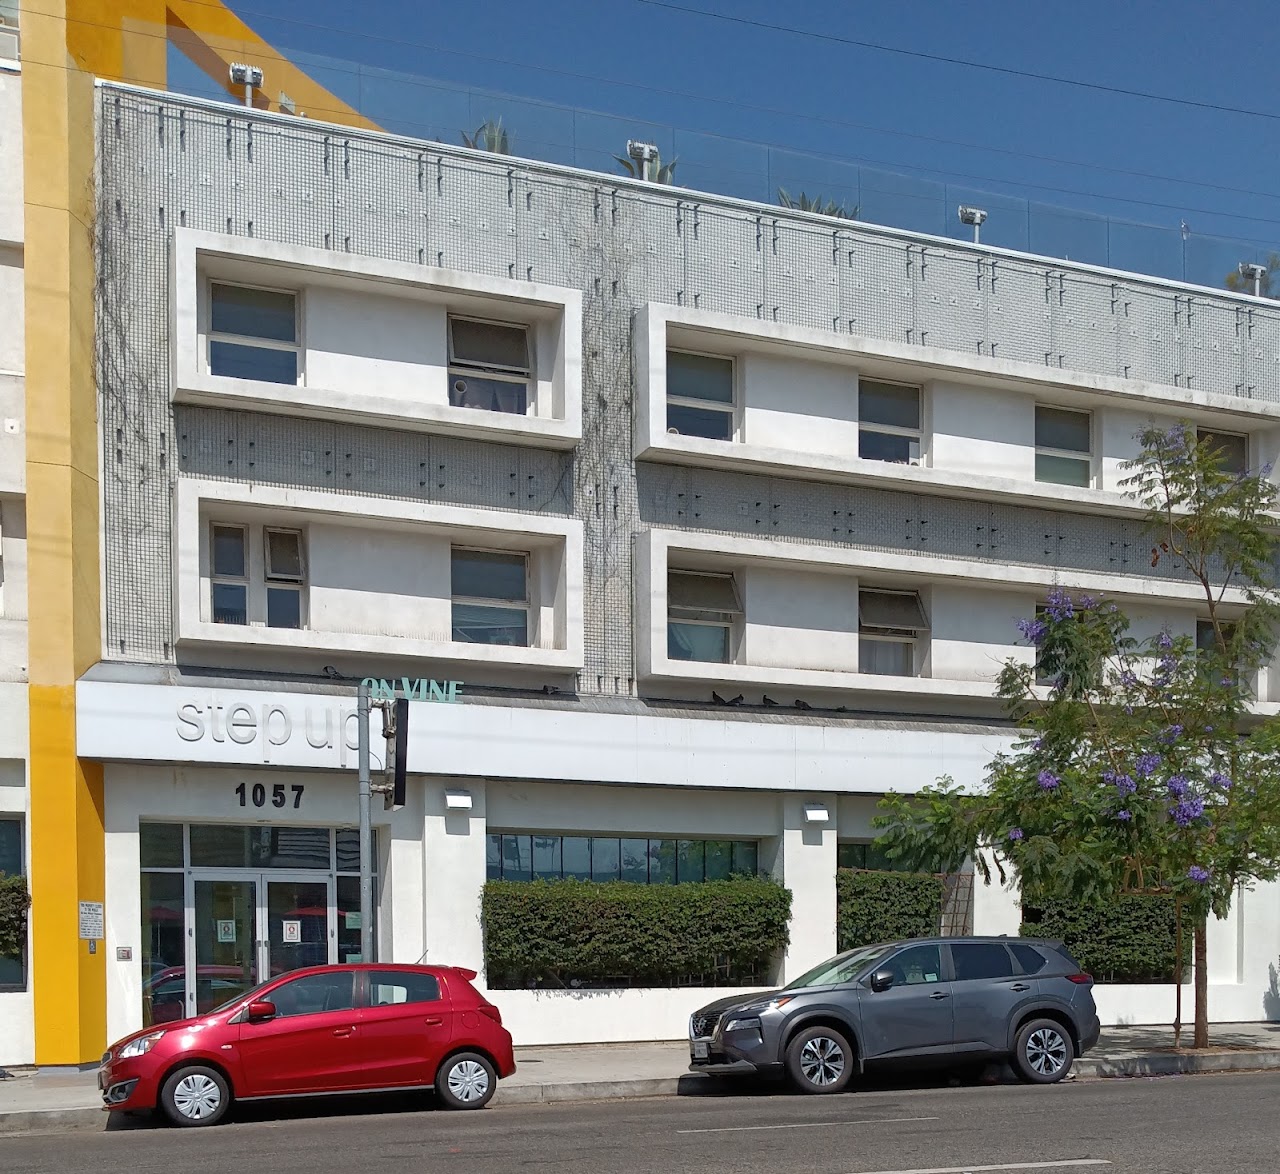 Photo of STEP UP ON VINE. Affordable housing located at 1057 VINE ST LOS ANGELES, CA 90038